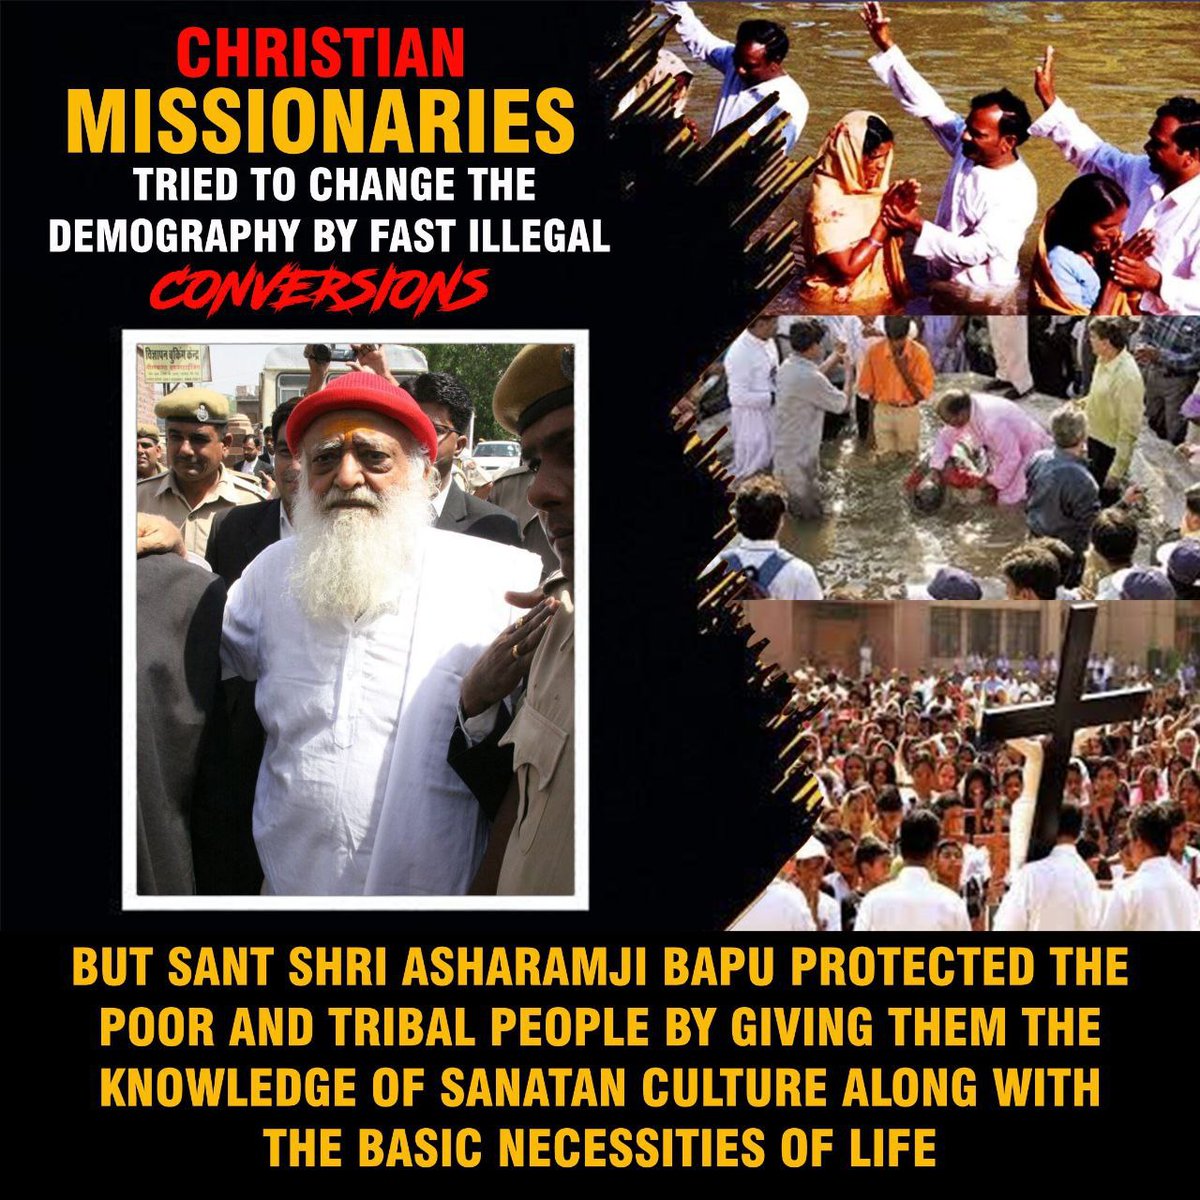 Right,
Sant Shri Asharamji Bapu dedicated himself to thwarting religious conversion efforts at the grassroots level. He spearheaded the initiative of 'Ghar Vapasi' to reintegrate converted Hindus back into their original faith. 
#RoadBlockToConversion
👉 Cause of Conspiracy